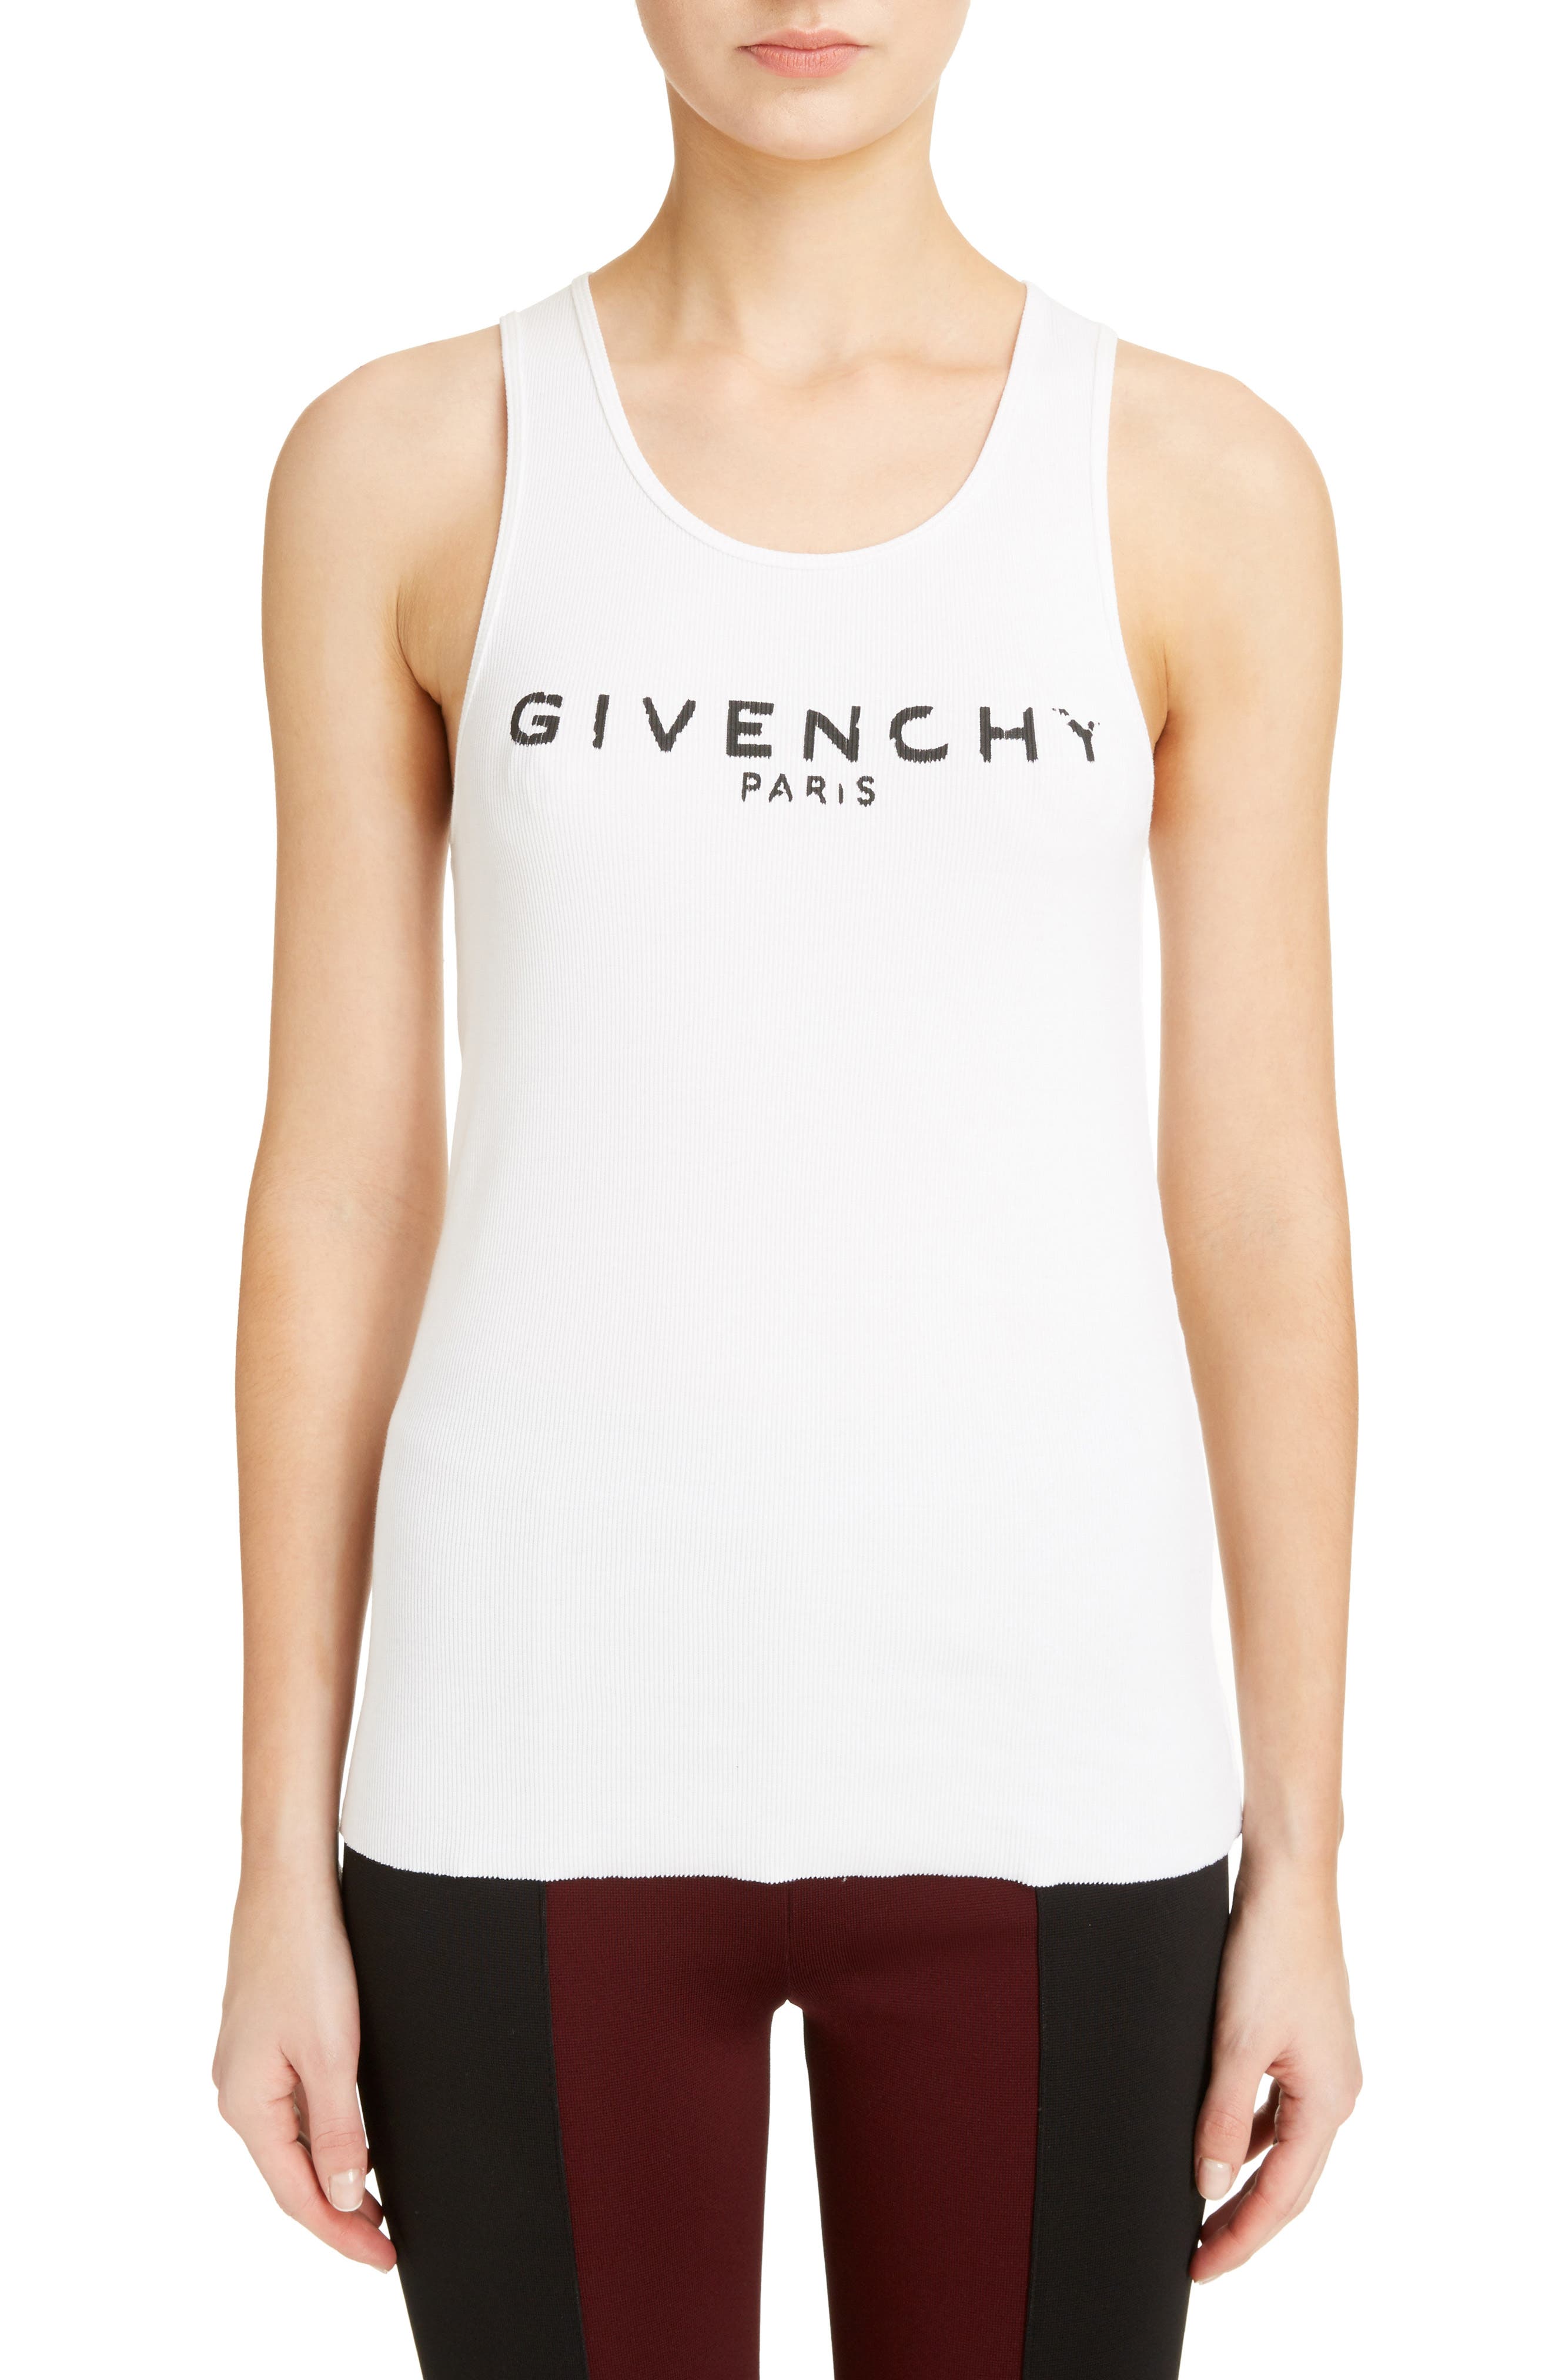 givenchy tank top womens